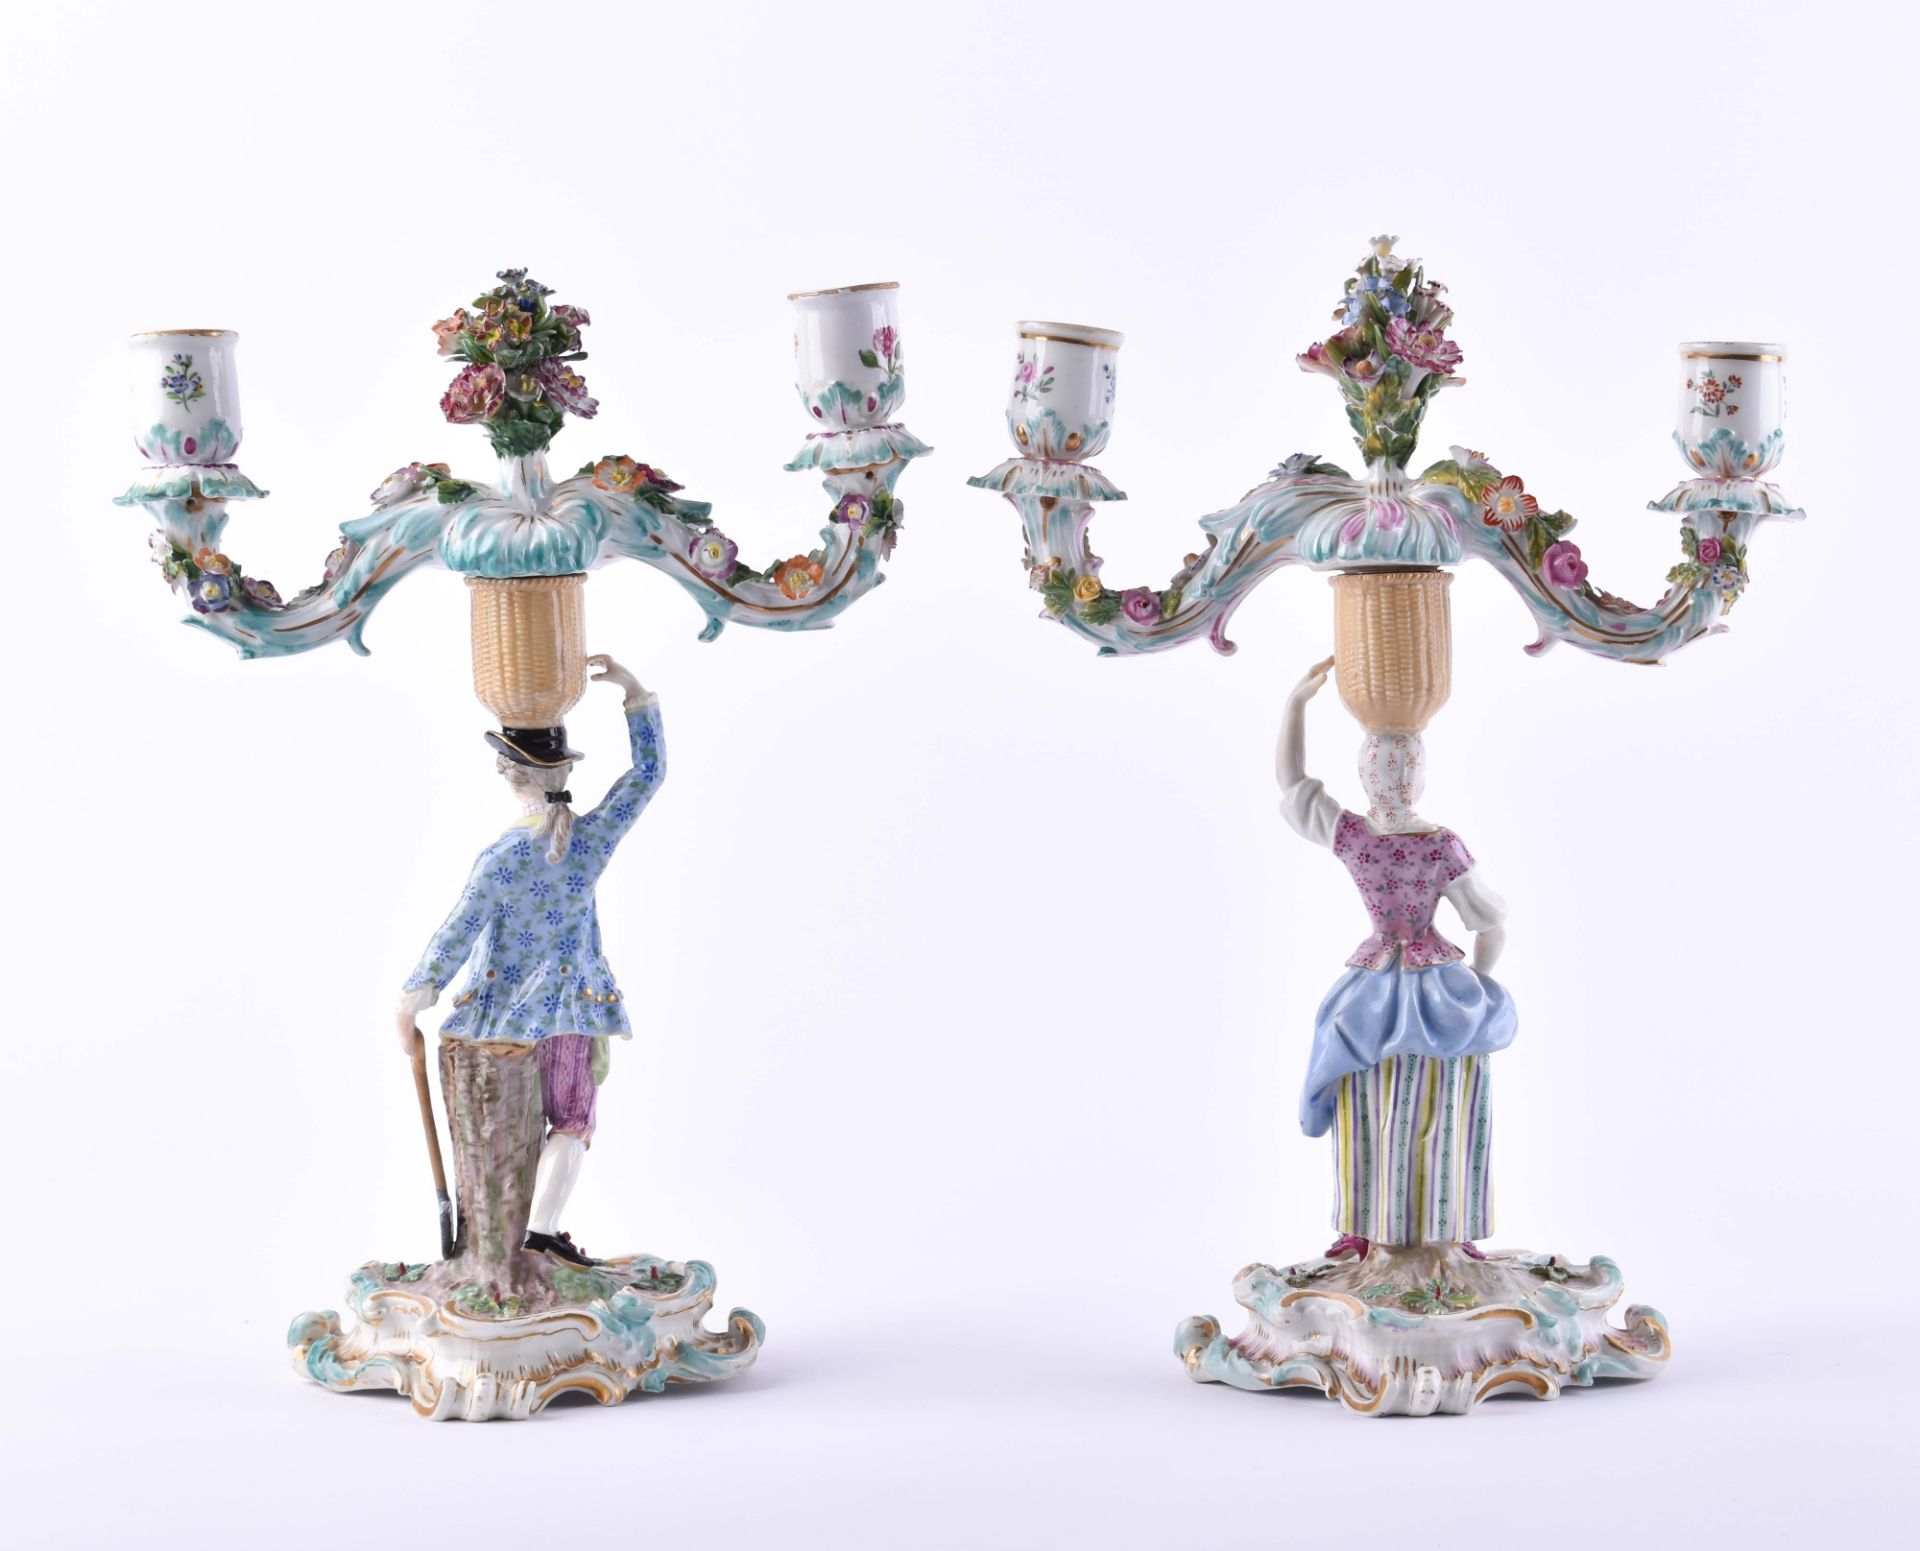  figural pair of candlesticks Meissen 19th century - Image 3 of 7